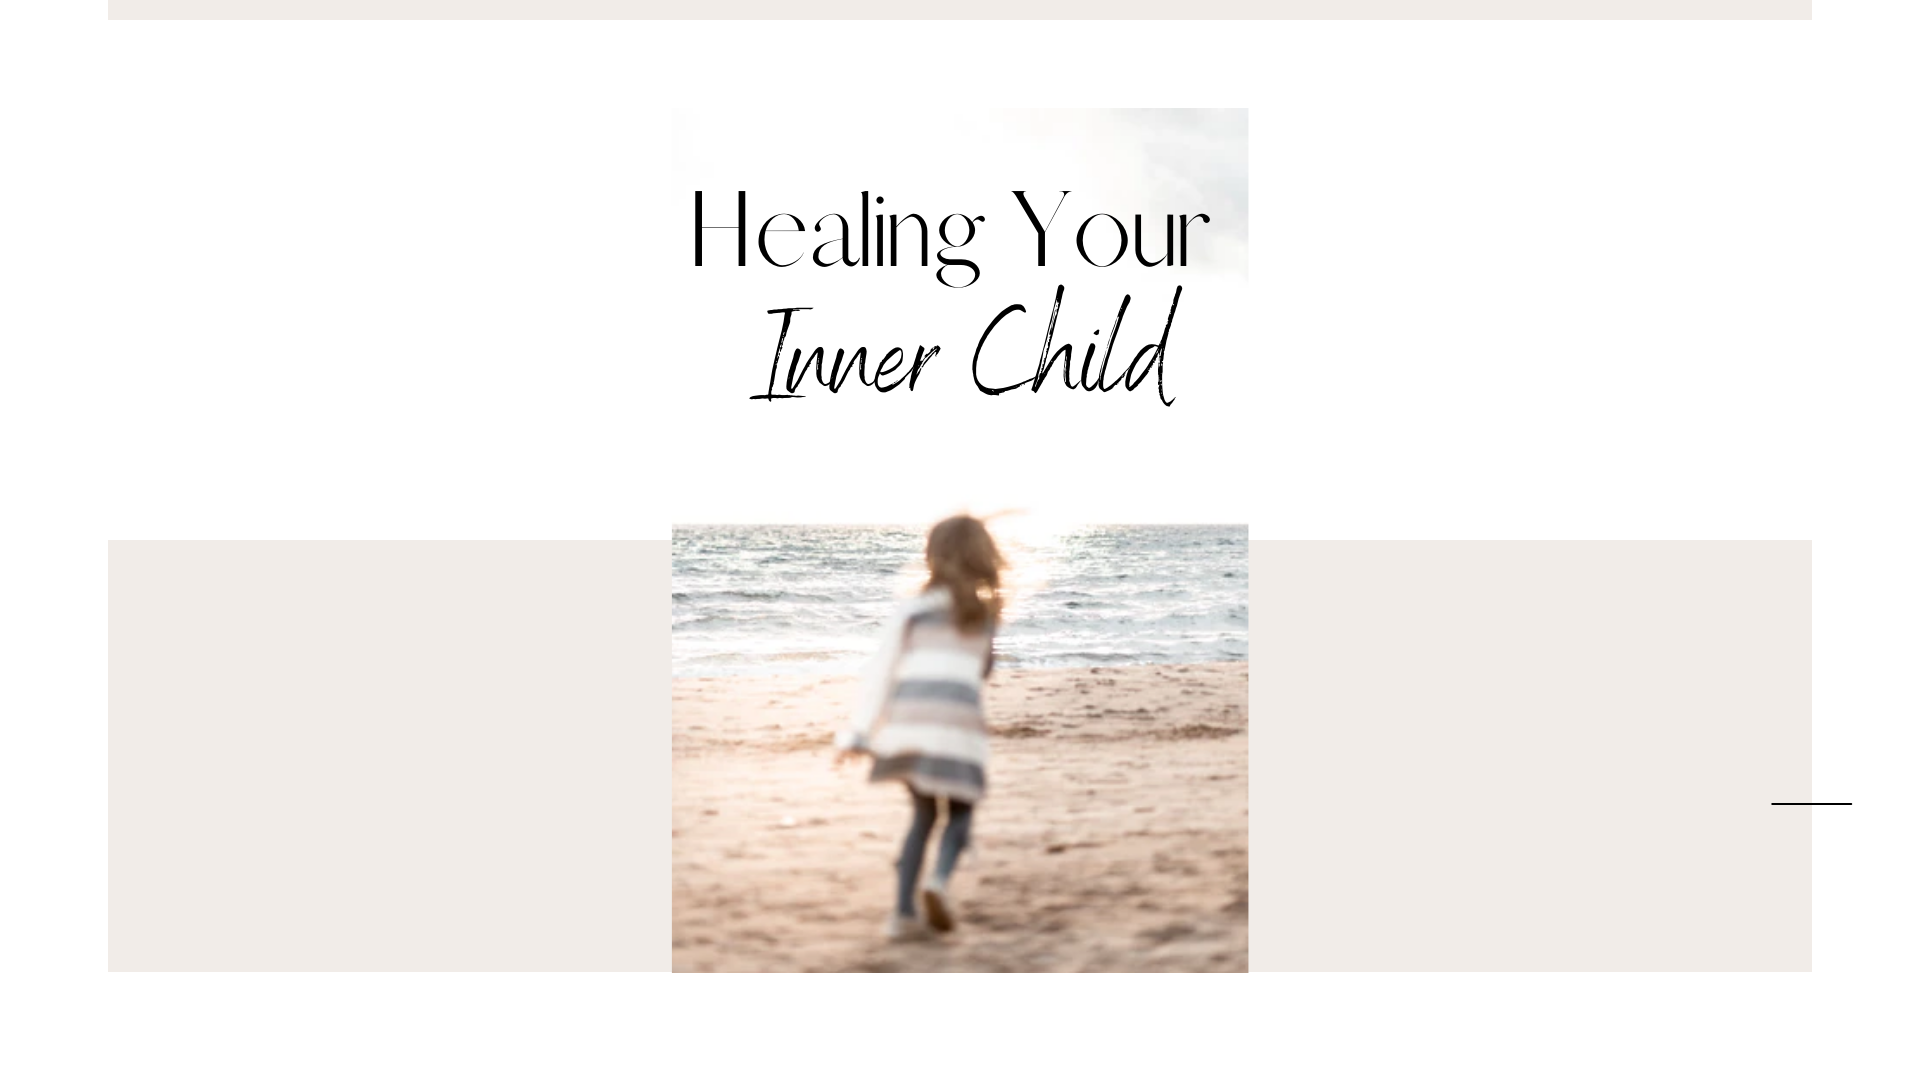 A starter guide to healing childhood wounds and living with more ease